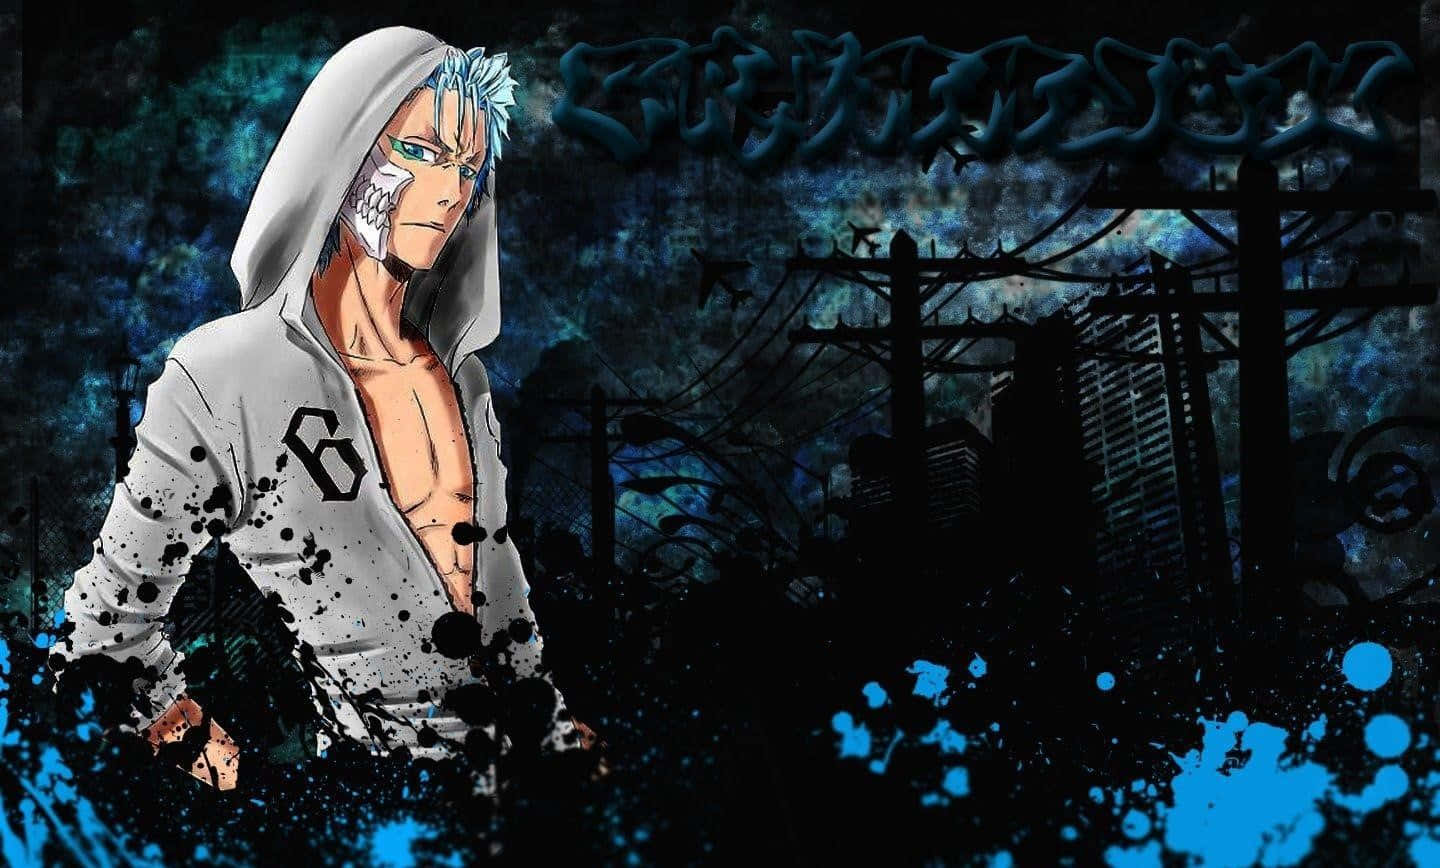 Grimmjow Jaegerjaquez, a staple villain in the world of the anime "Bleach". Wallpaper